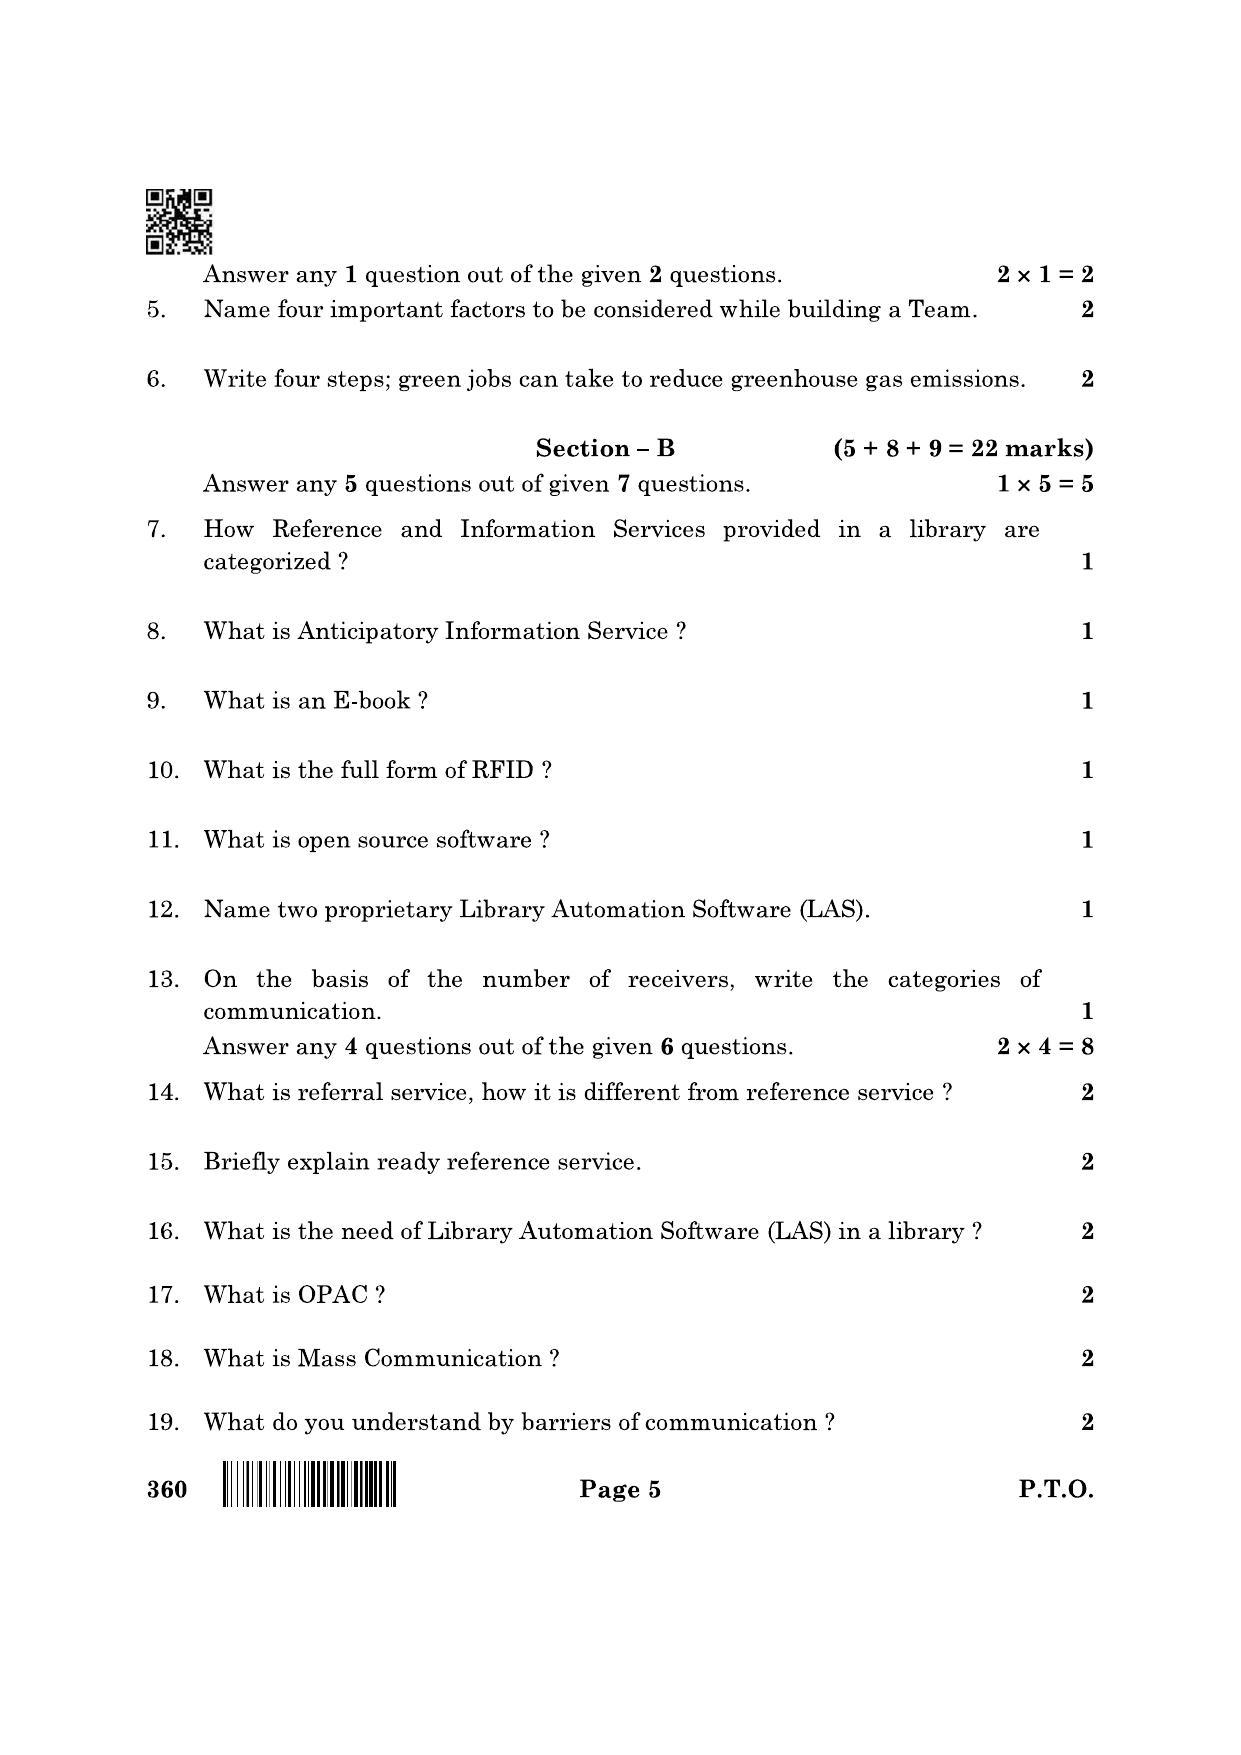 CBSE Class 12 360 Library And Information Science 2022 Question Paper - Page 5